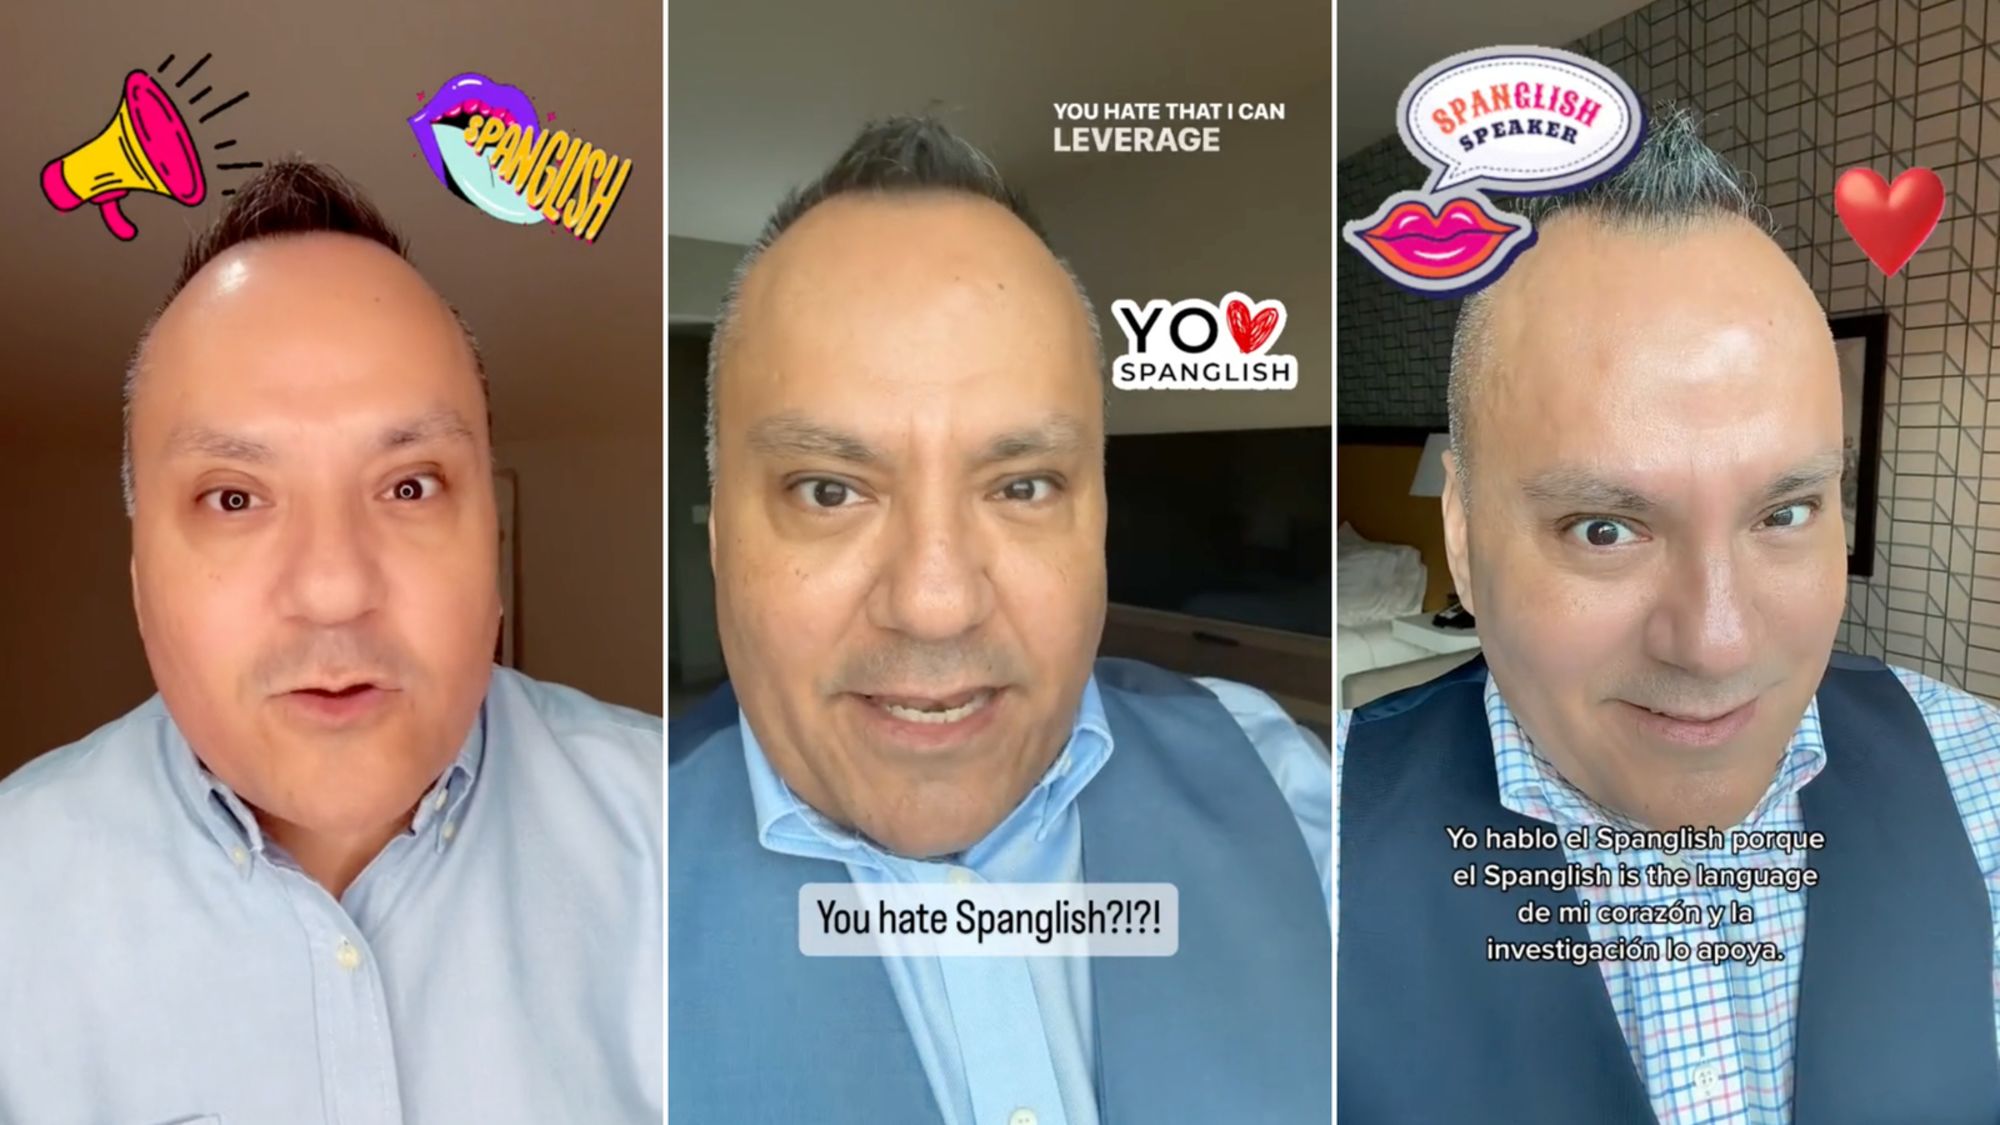 Dr. José Medina's videos discussing Spanglish have gotten millions of views and hundreds of thousands of likes on TikTok.